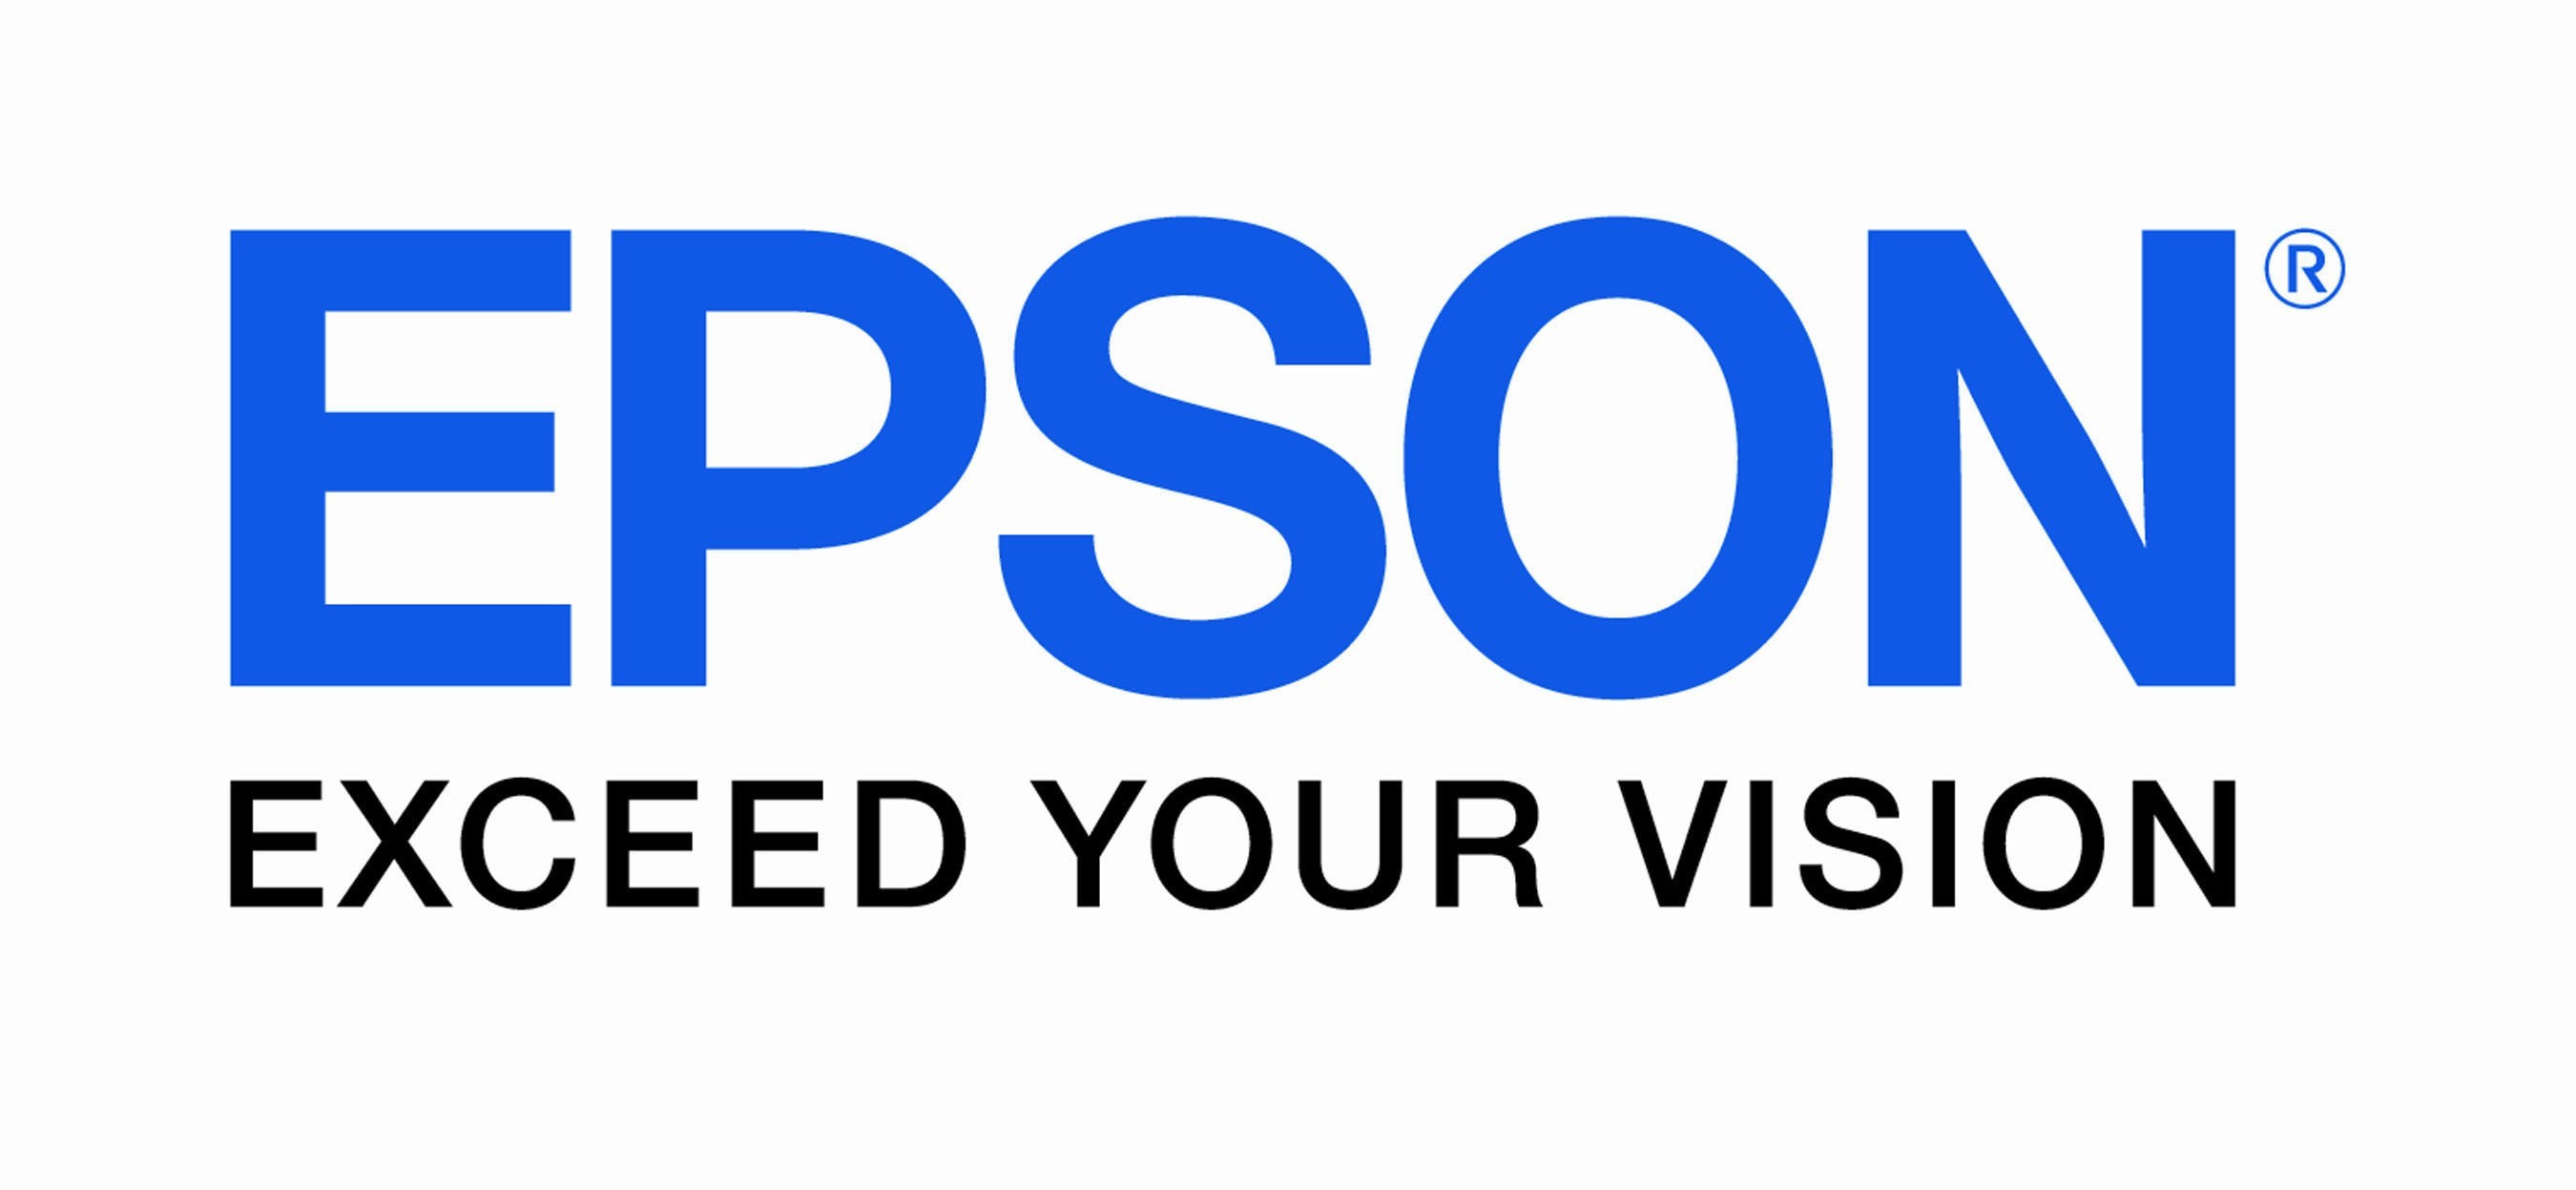 Epson Announces New Affordable and Convenient Home Printing Solutions